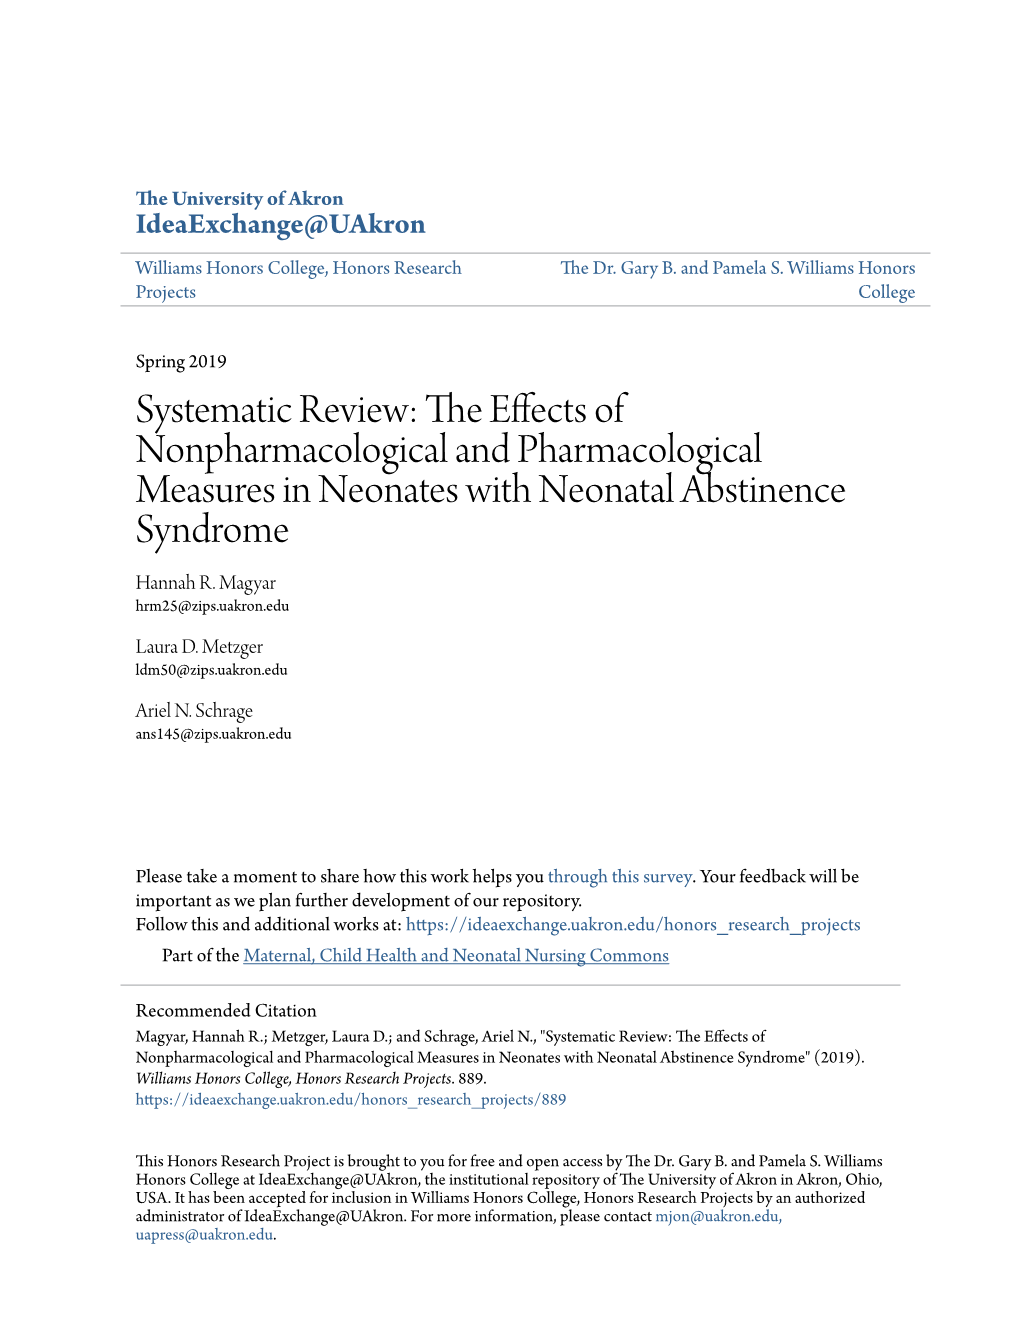 The Effects of Nonpharmacological and Pharmacological Measures in Neonates with Neonatal Abstinence Syndrome" (2019)